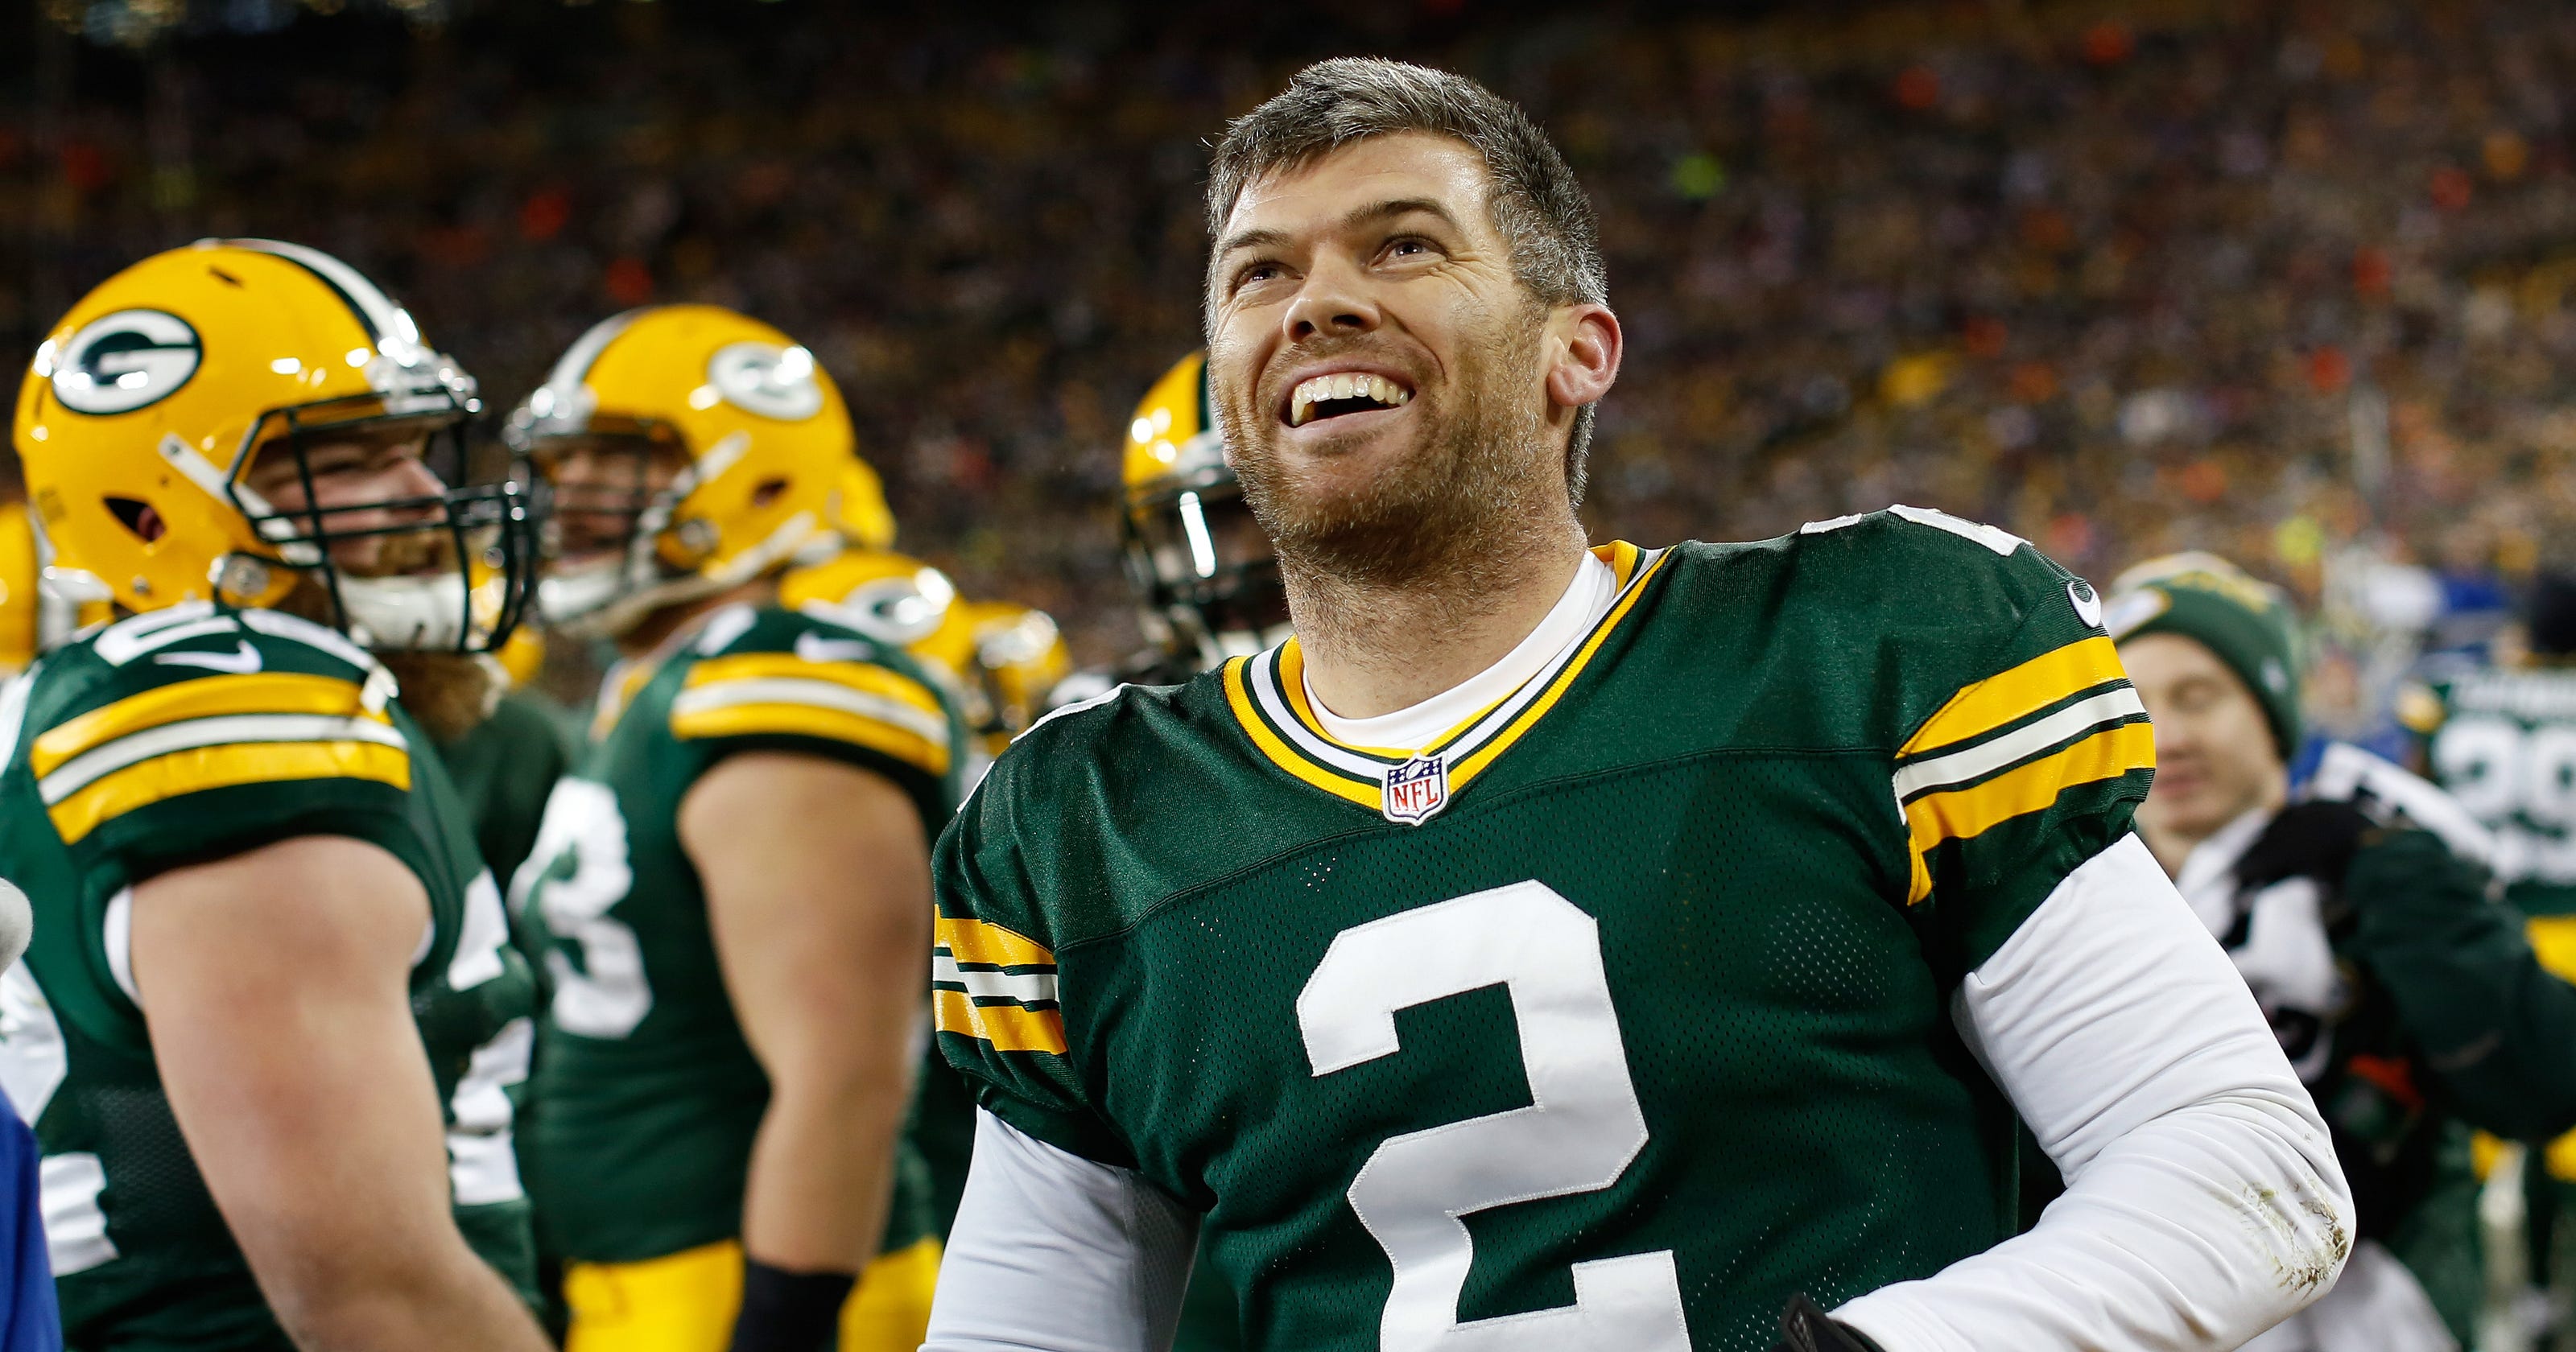 Mason Crosby 'Every time I step on the field, I’m interviewing'